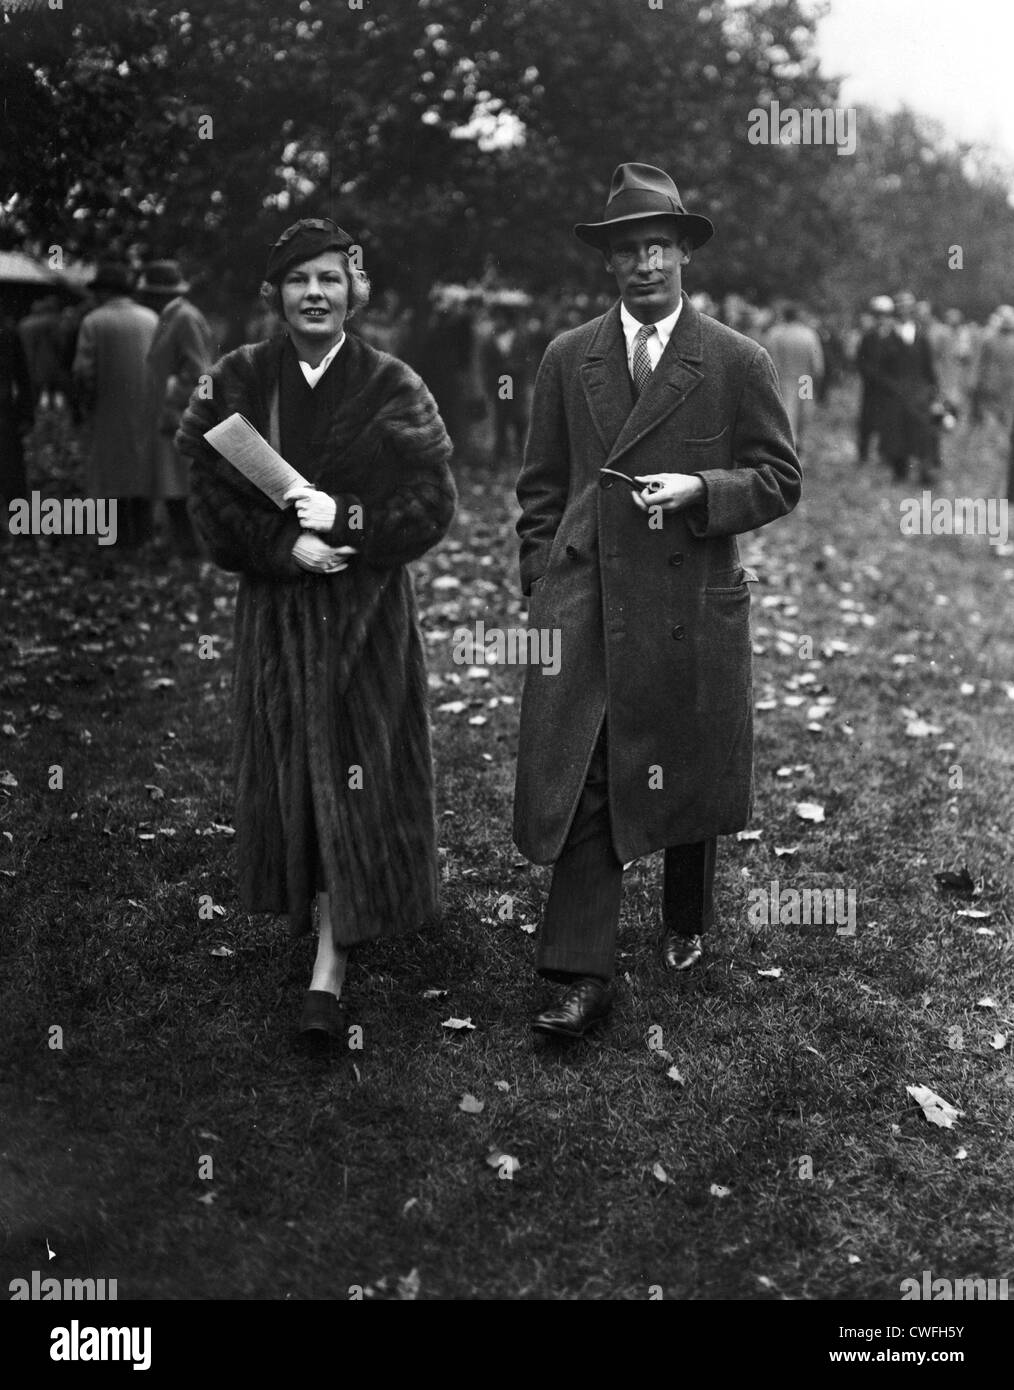 Mr and Mrs August Belmont IV,  arriving at Belmont Race Track, New York, ca 1937 Stock Photo